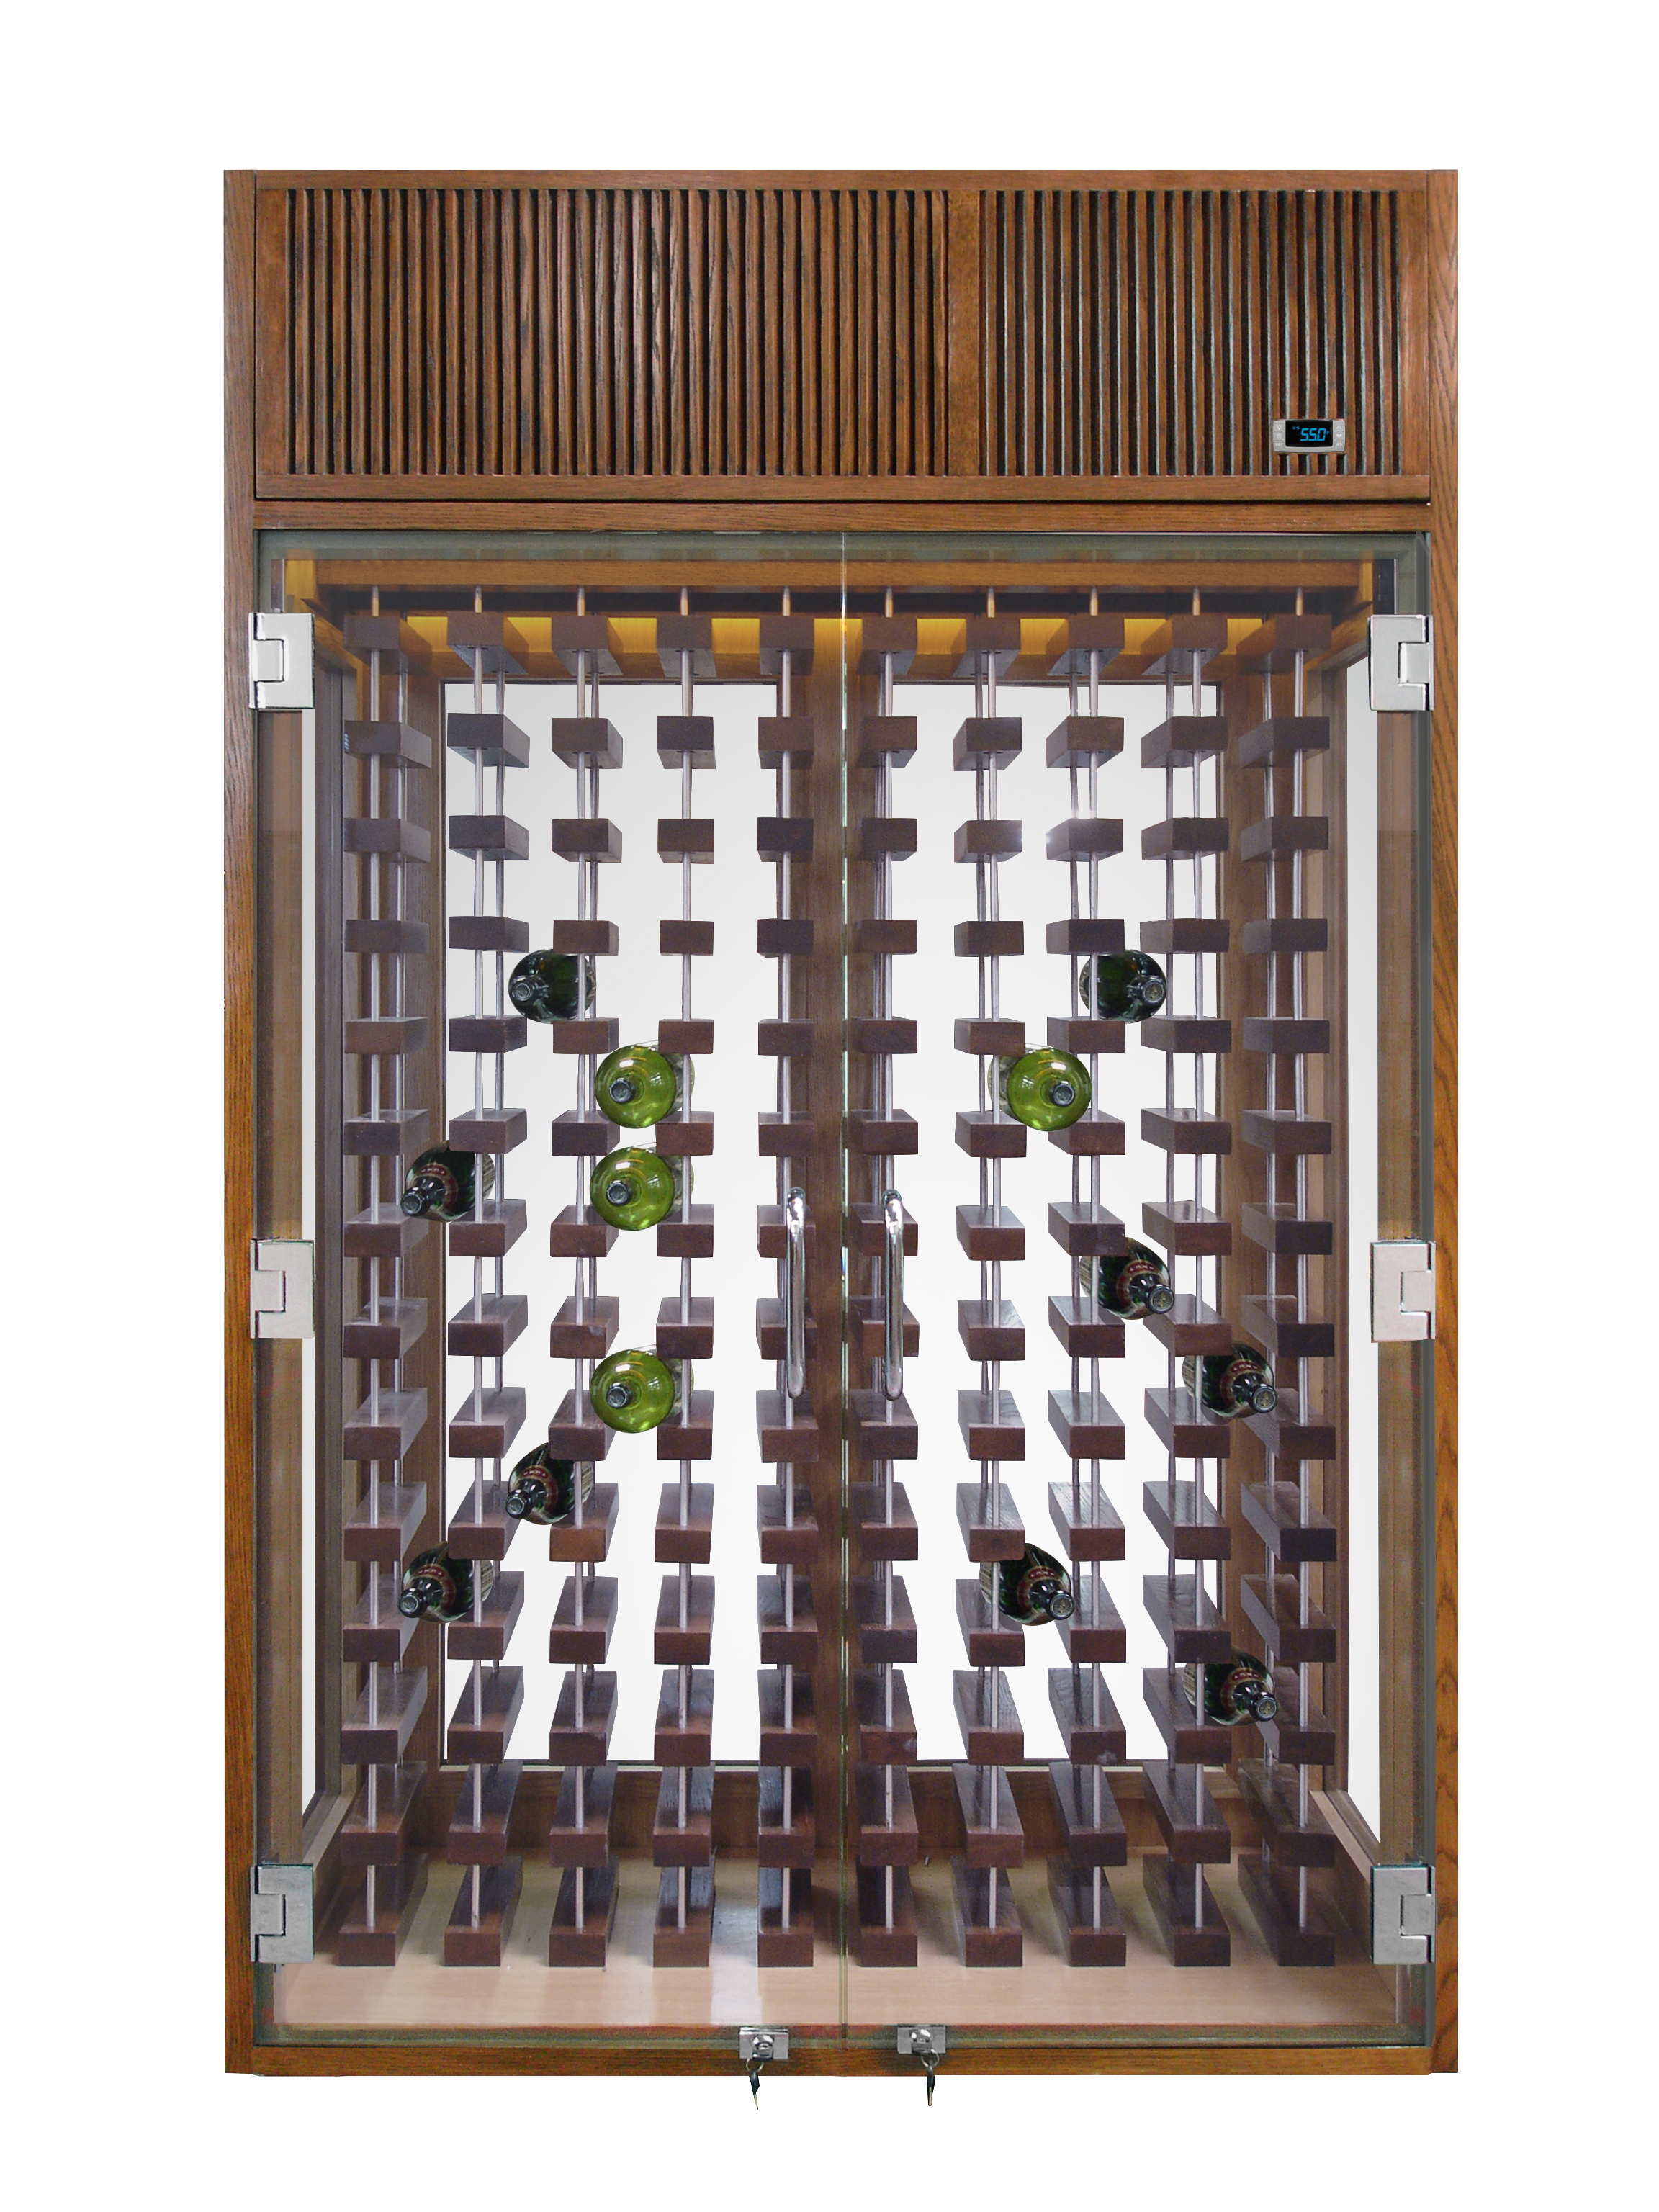 Vinotemp To Launch Custom Suspended Cable Wine Bottle Racking At